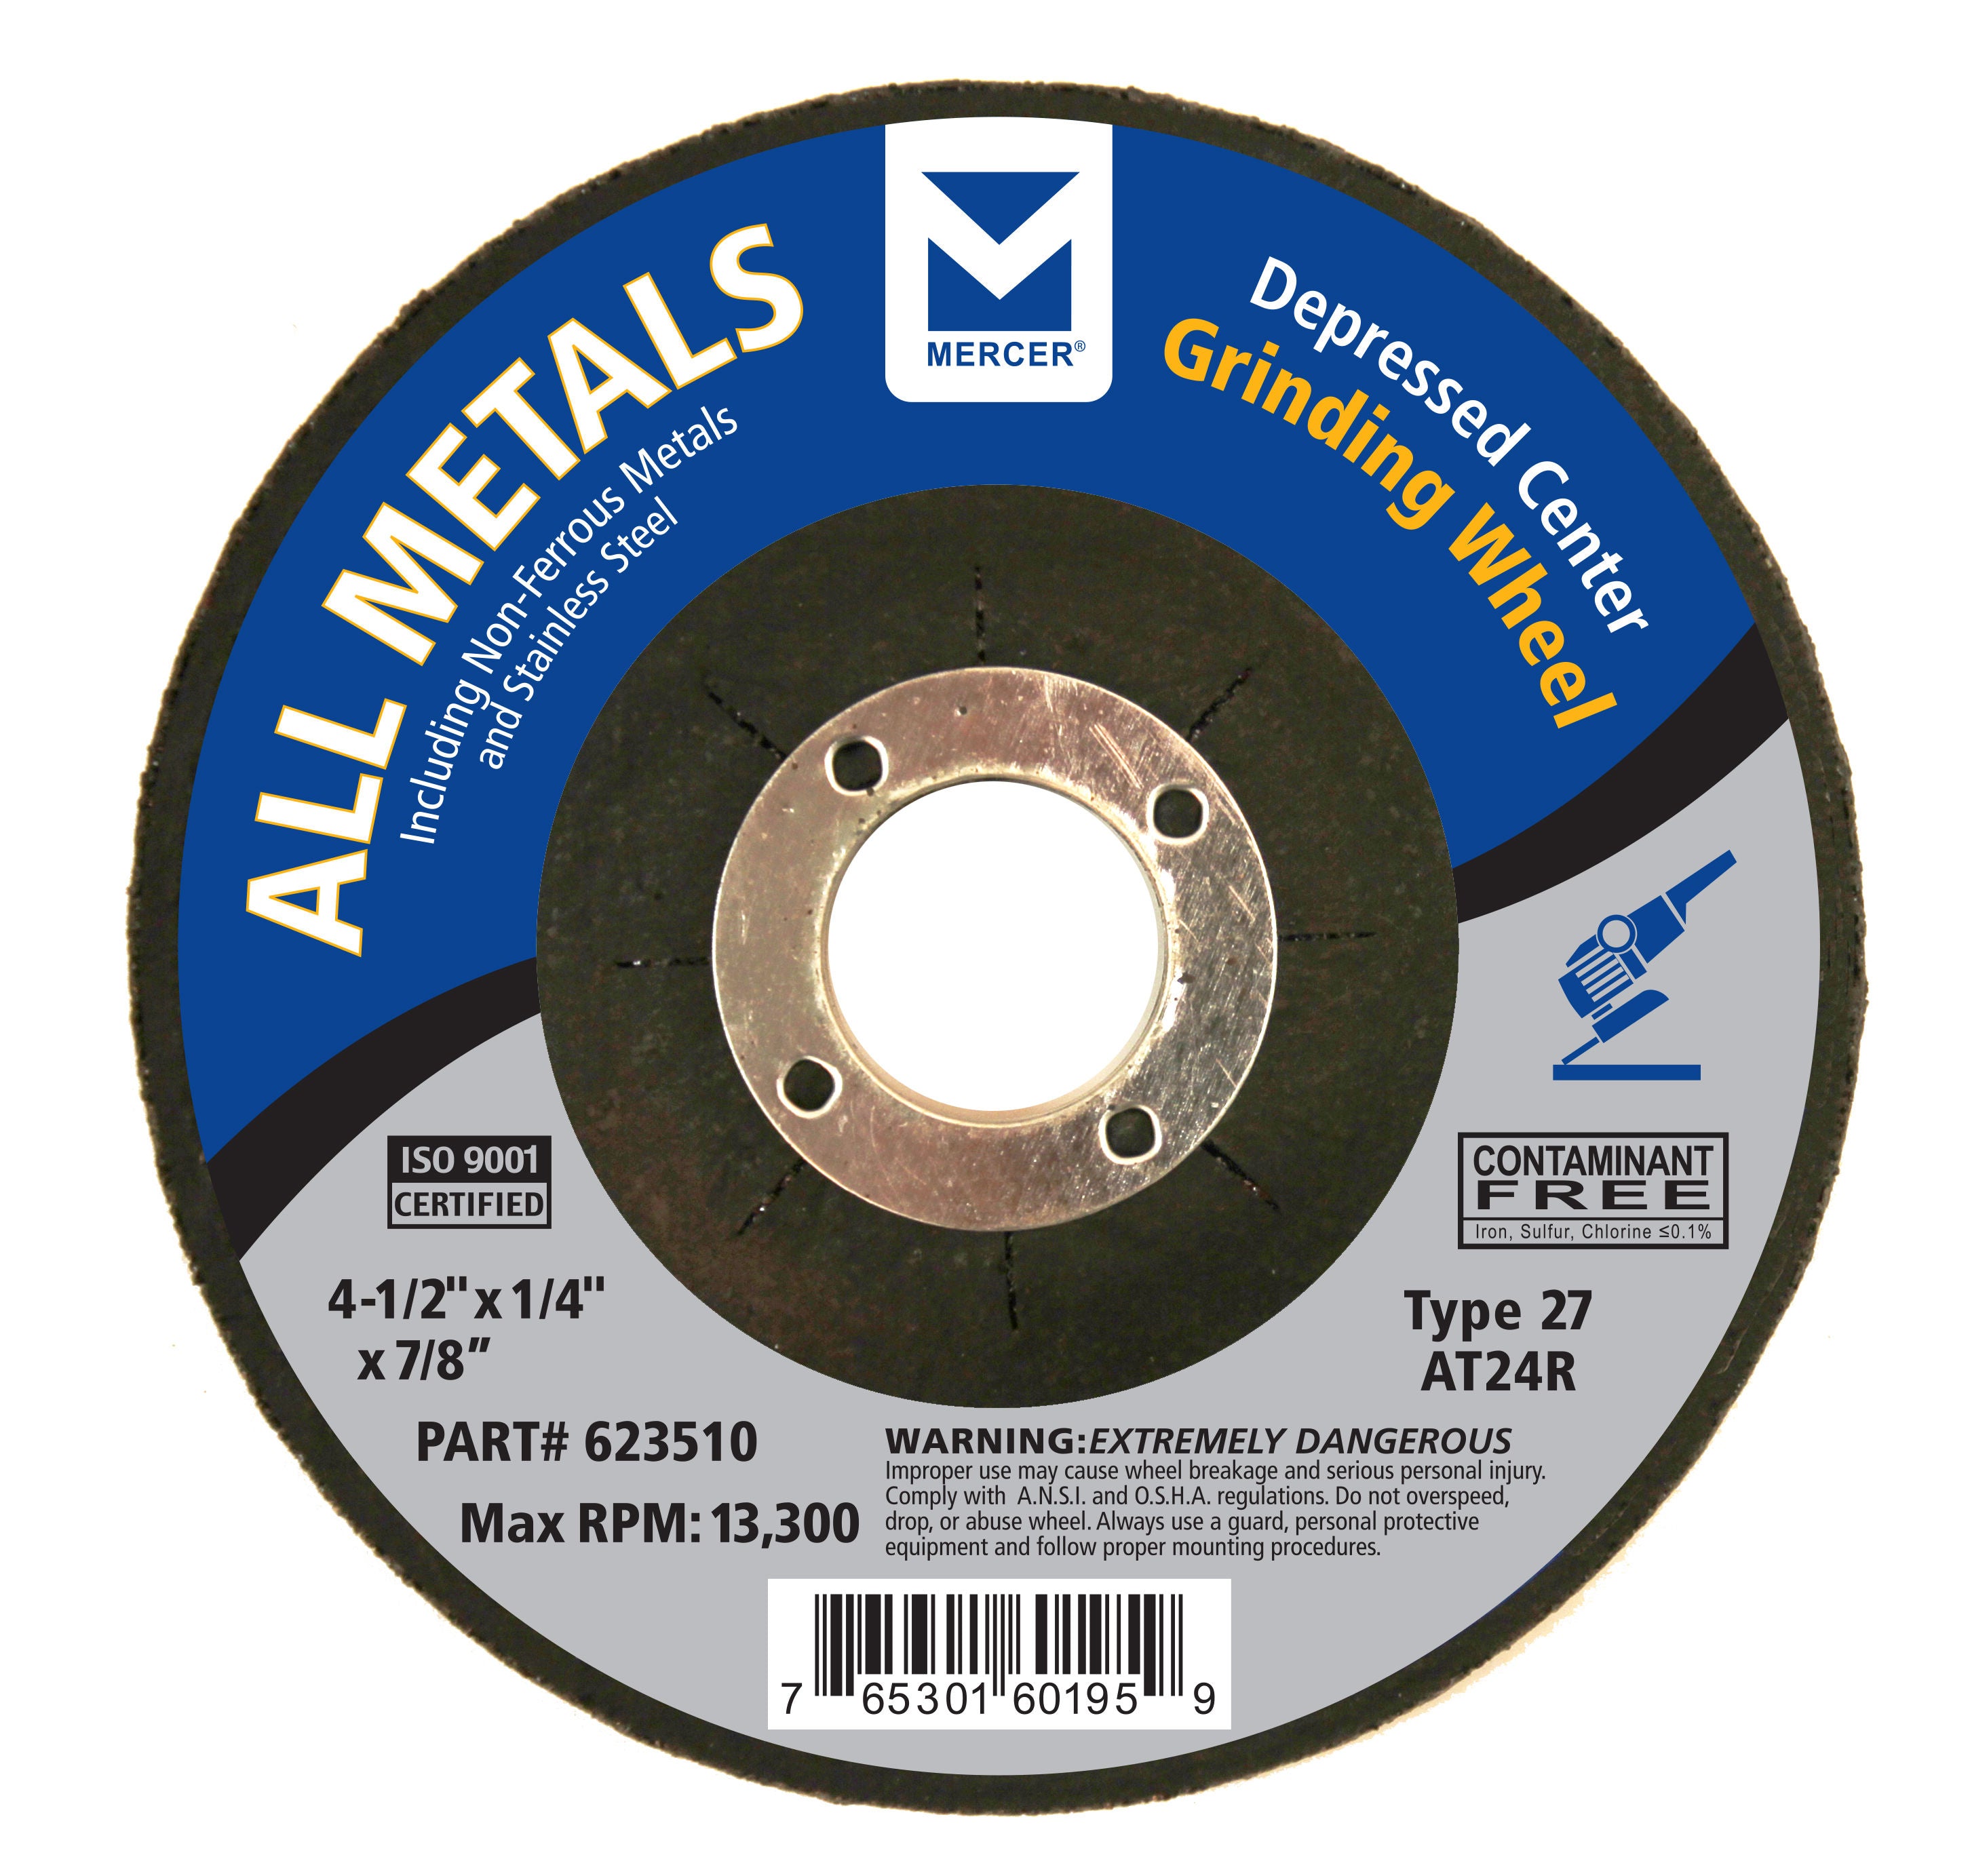 5"x1/4"x7/8" AT24R T27 Depressed Center Grinding Wheel for Stainless Steel - Single Grit